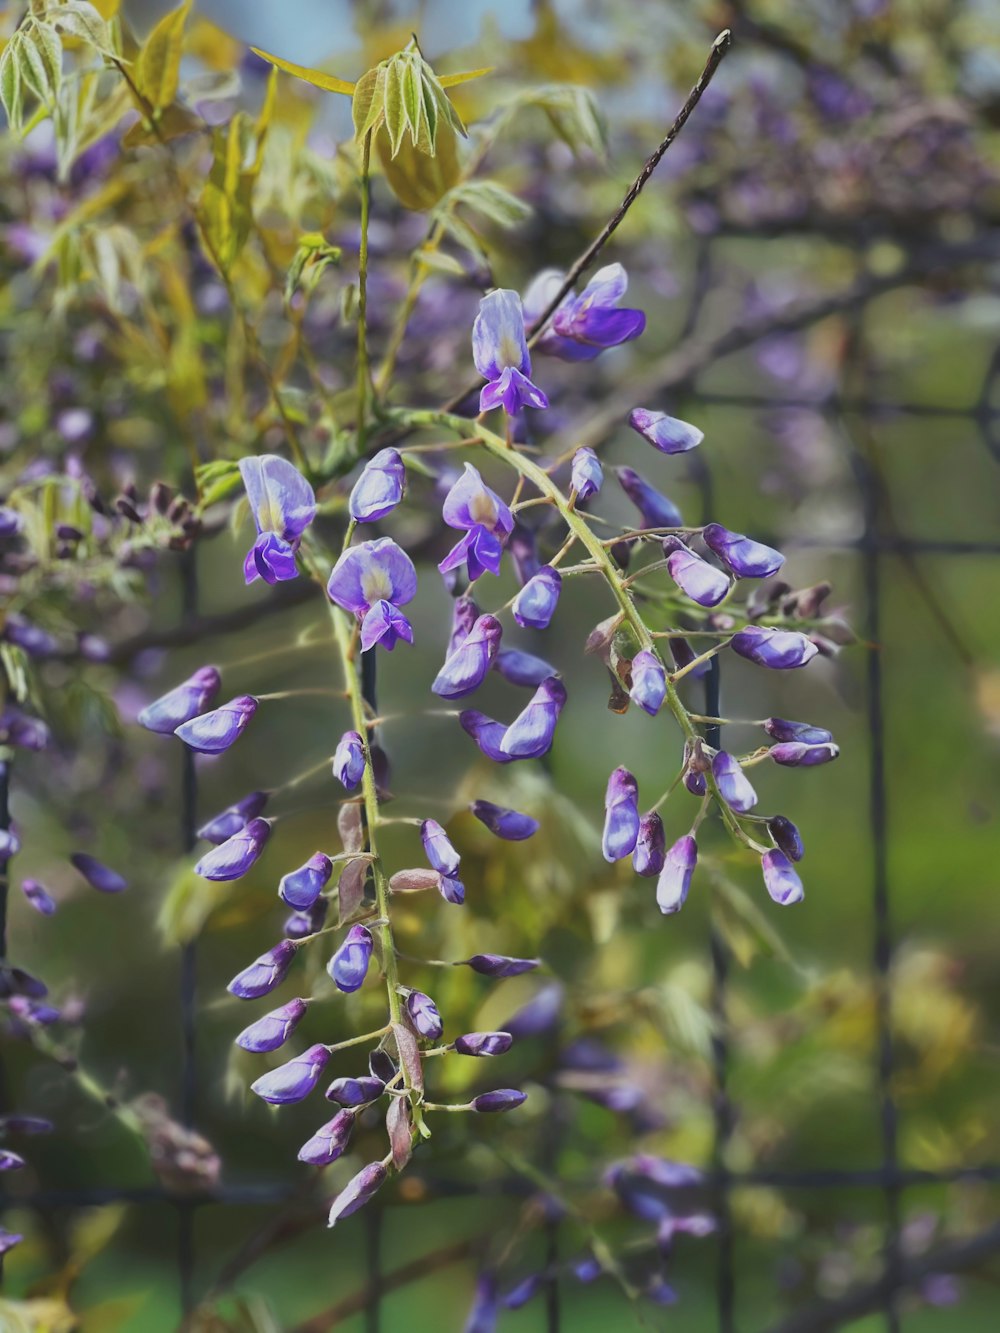 a bunch of purple flowers hanging from a wire fence